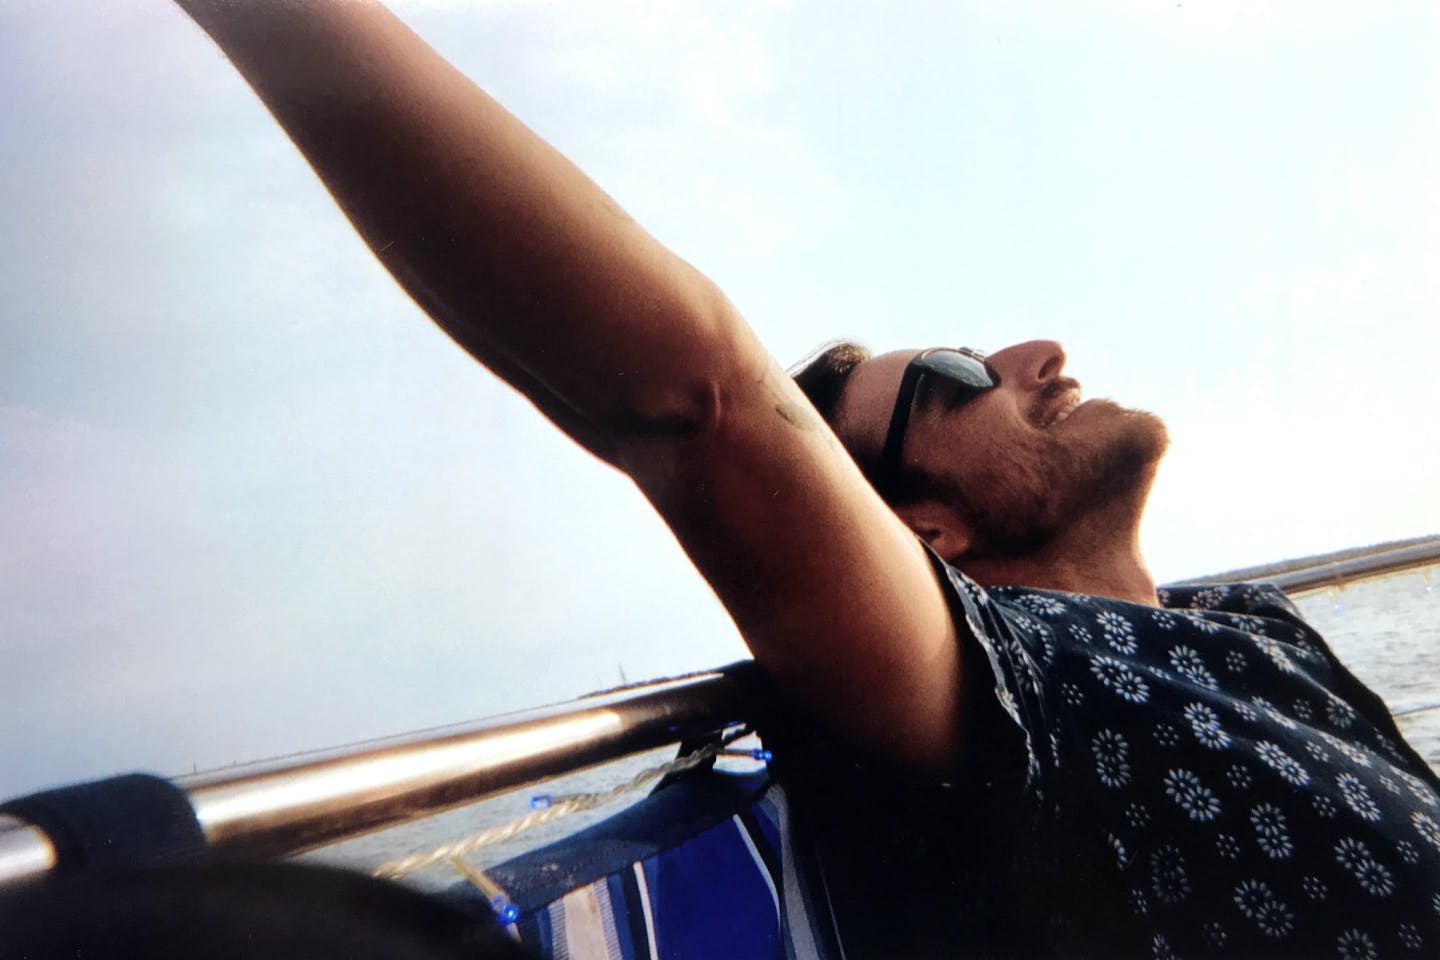 A man in sunglasses is smiling with his arms in the air. He is on a boat. He is wearing a navy shirt with white flowers on it.